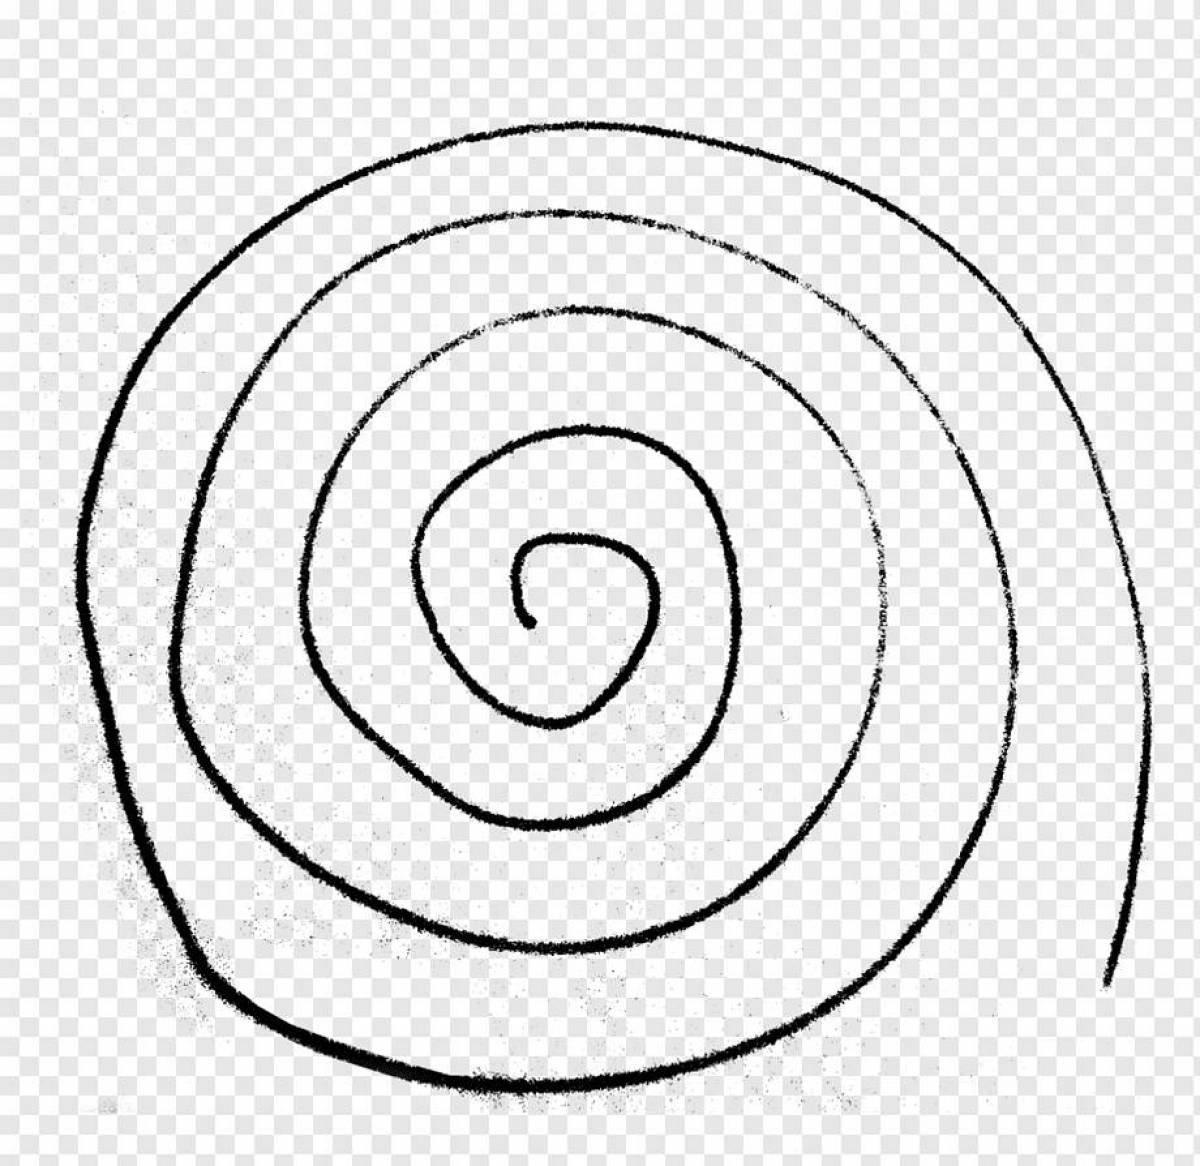 Exotic spiral coloring